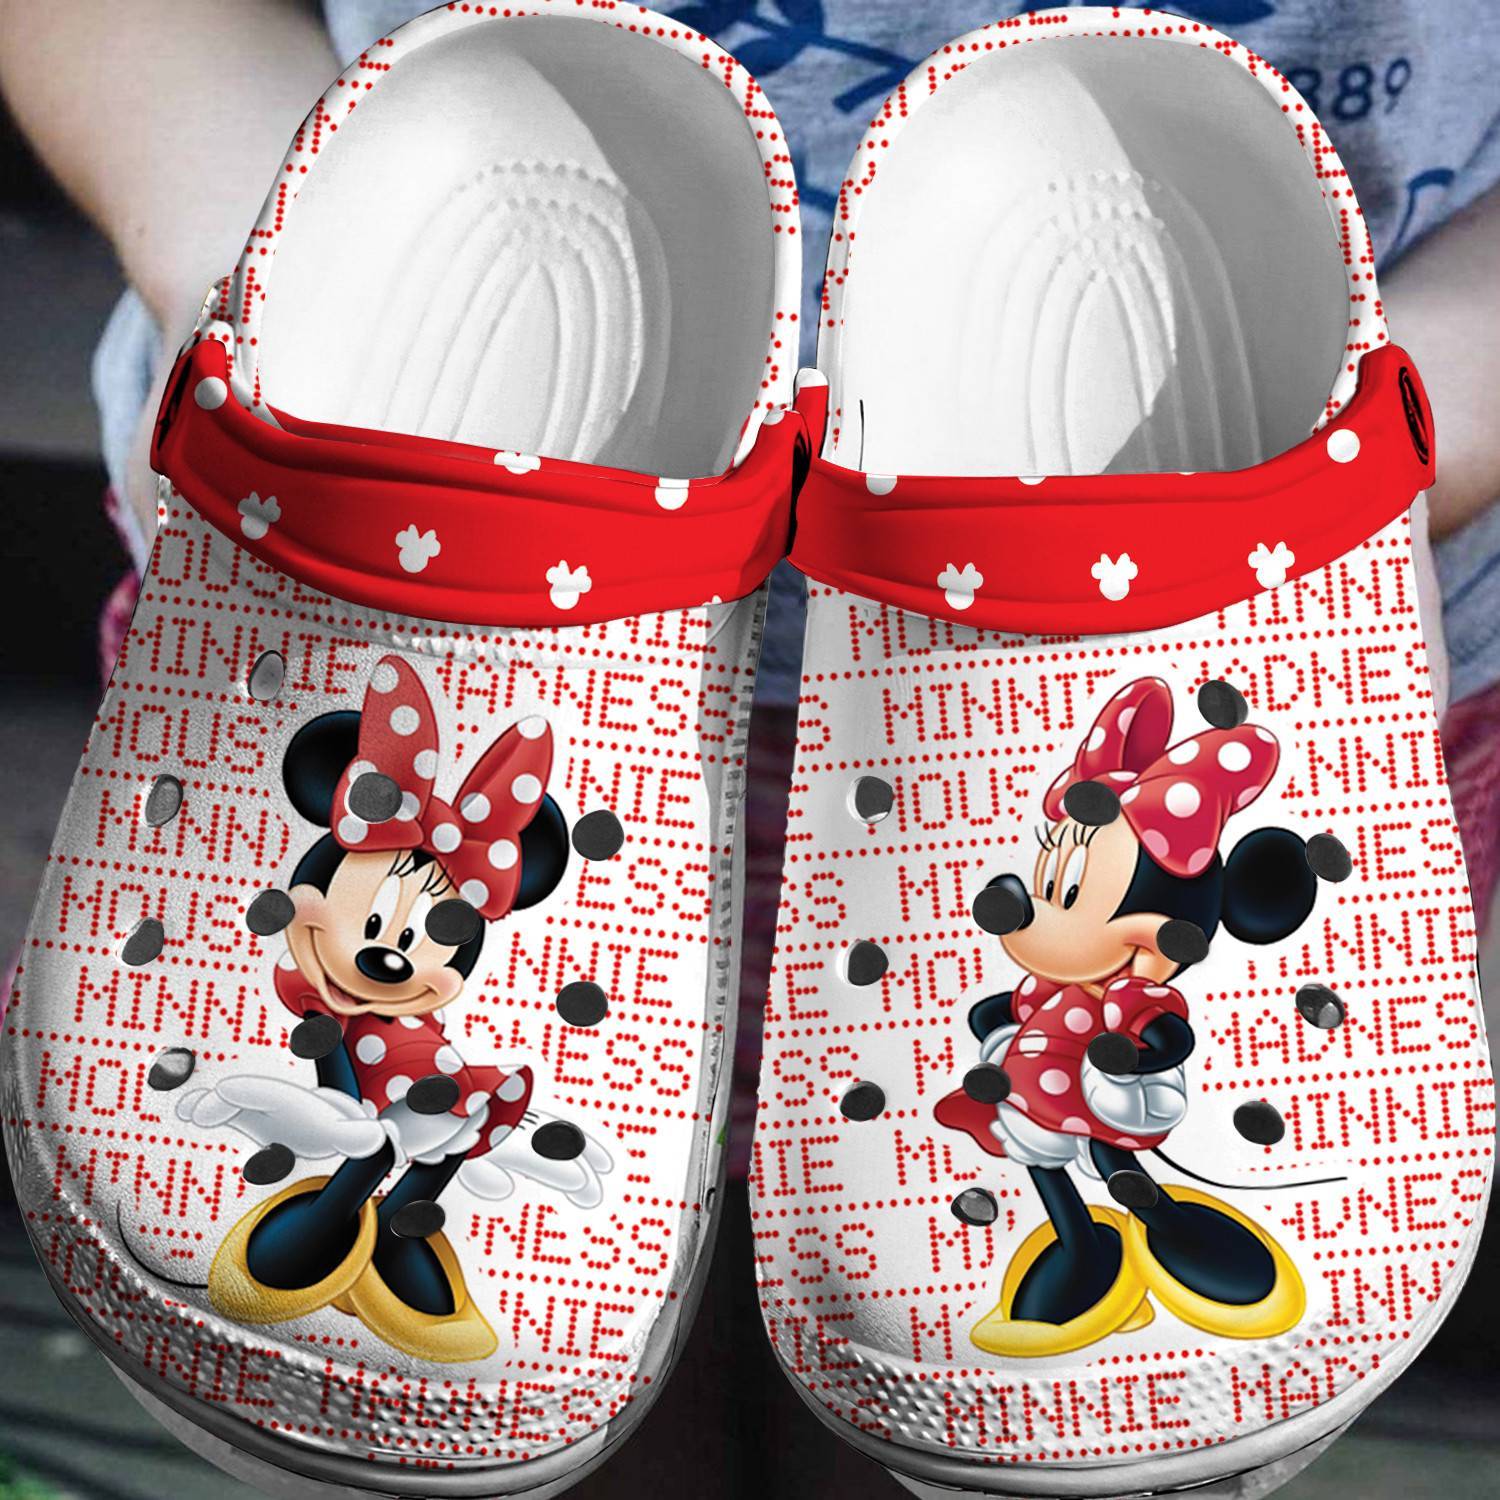 Adorable Elegance: Minnie Mouse 3D Clog Shoes for Disney Fashion Lovers